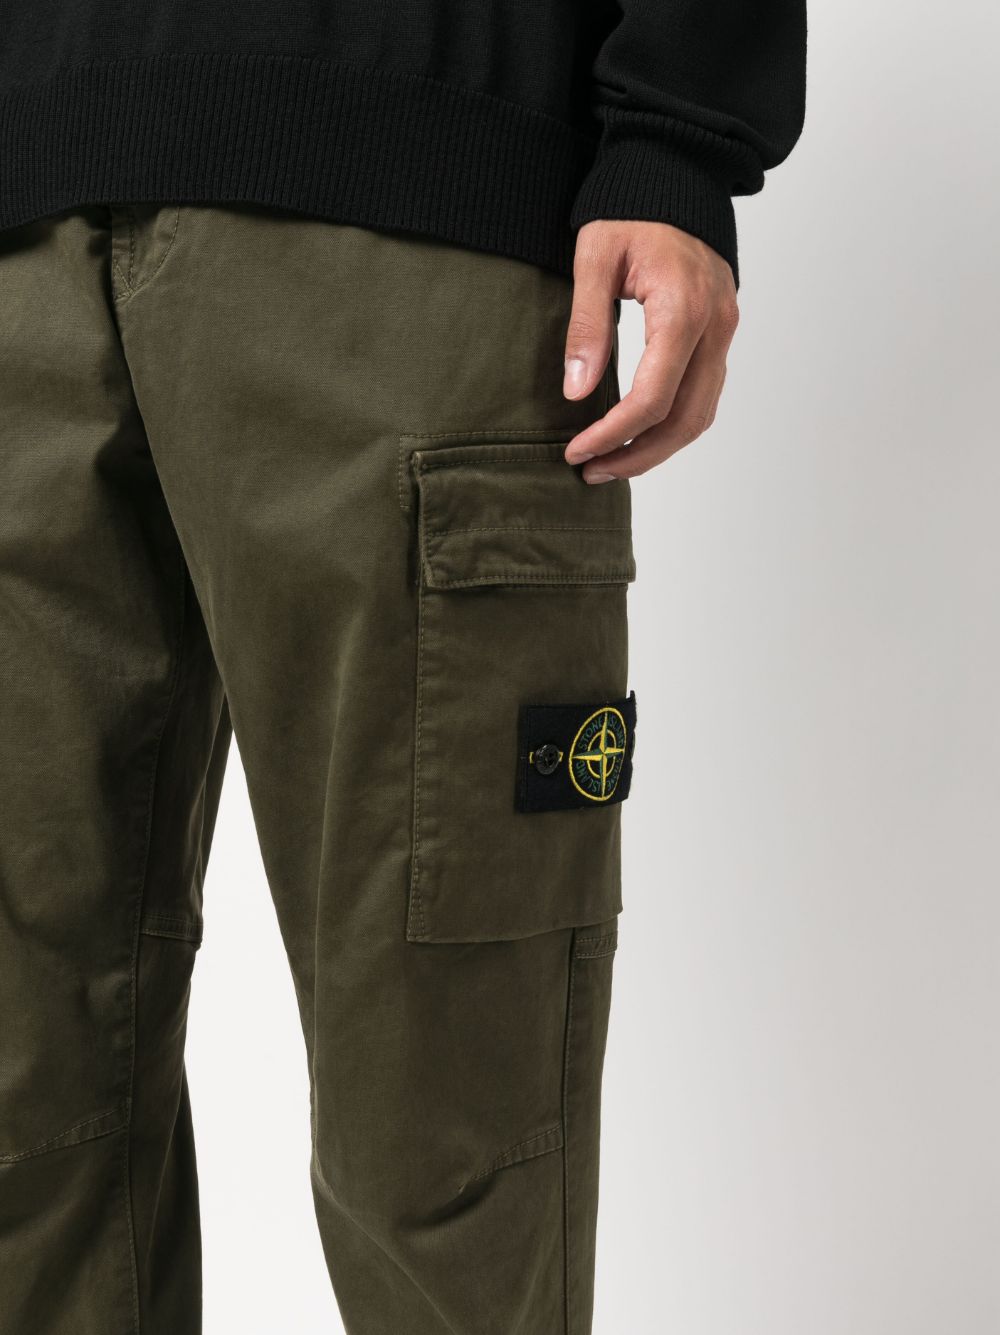 Green Tapered Cargo Pants by Stone Island on Sale